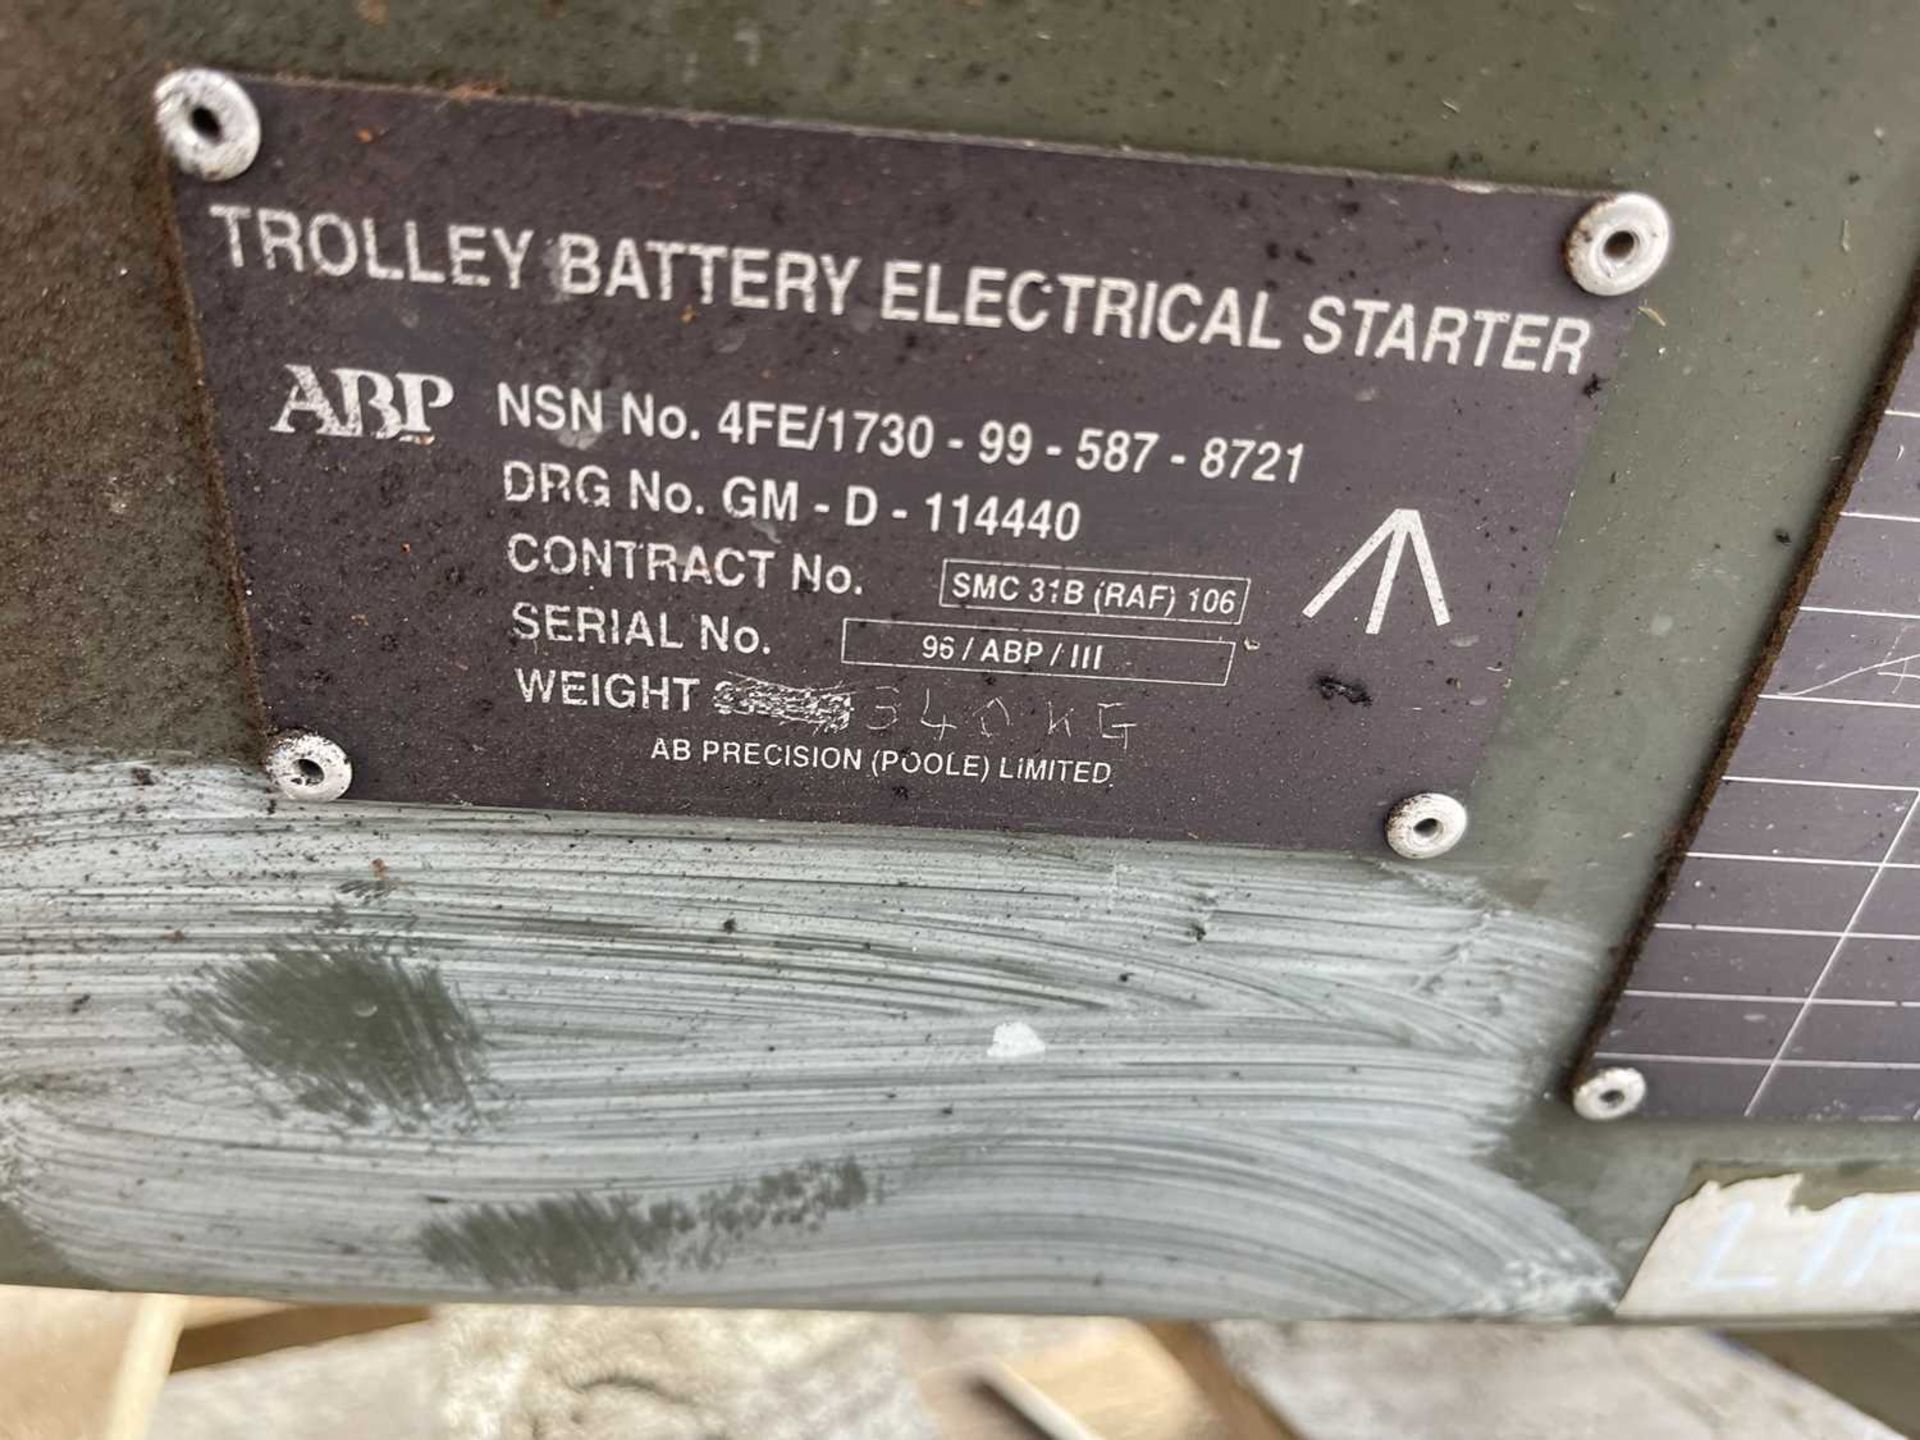 Trolley Battery Electrical Starter (No Batteries) - Image 8 of 8